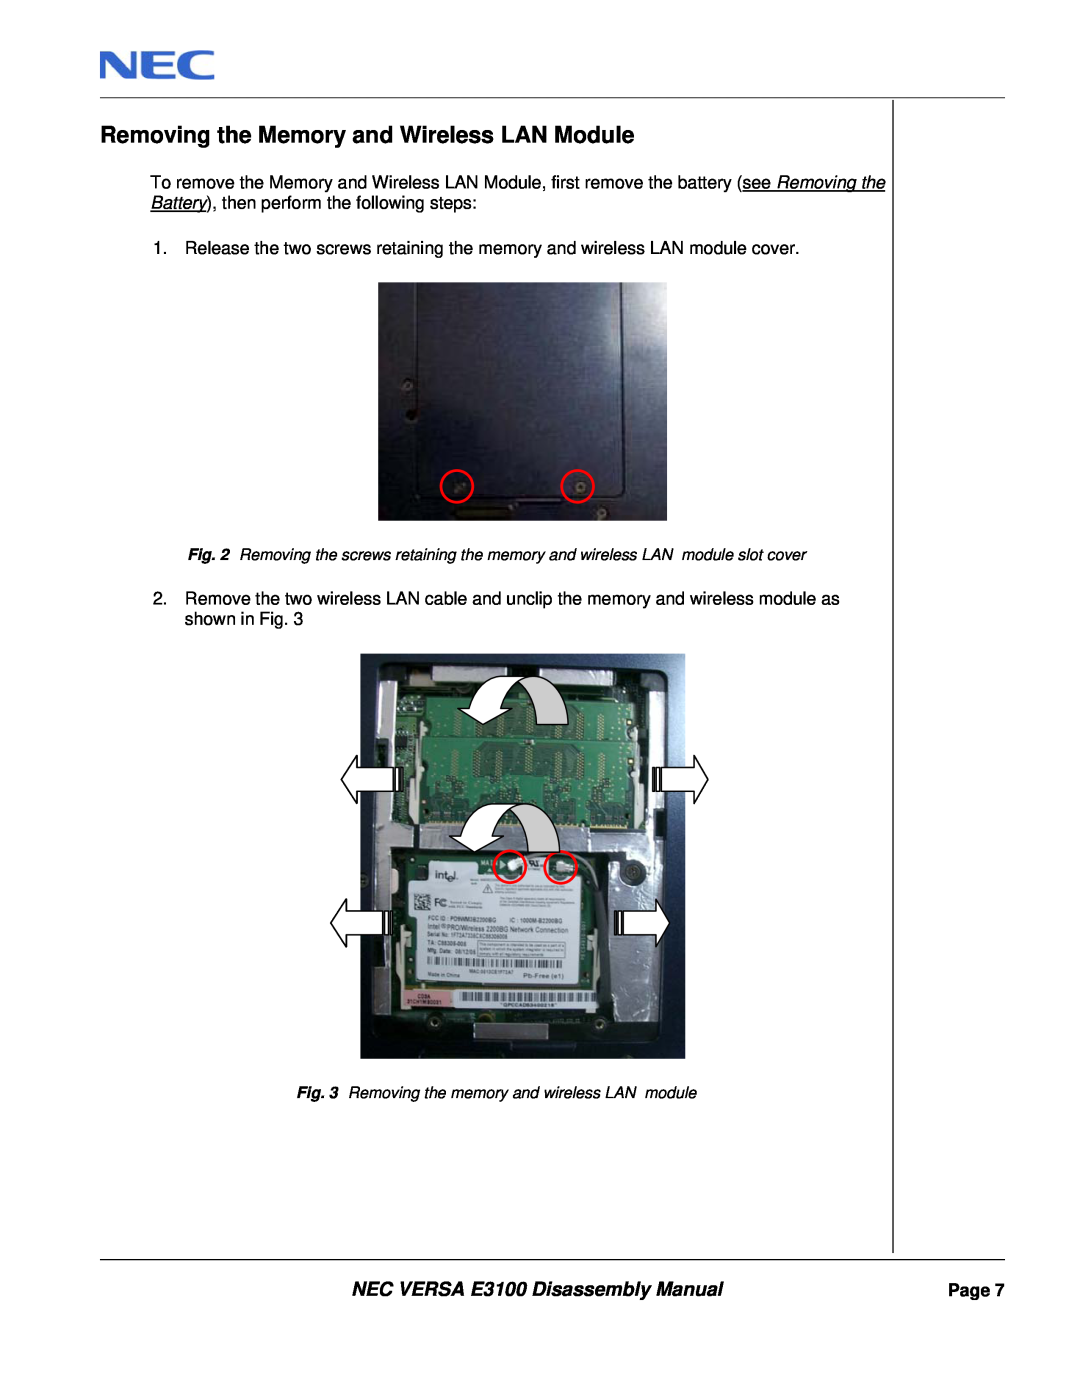 NEC manual Removing the Memory and Wireless LAN Module, NEC VERSA E3100 Disassembly Manual 